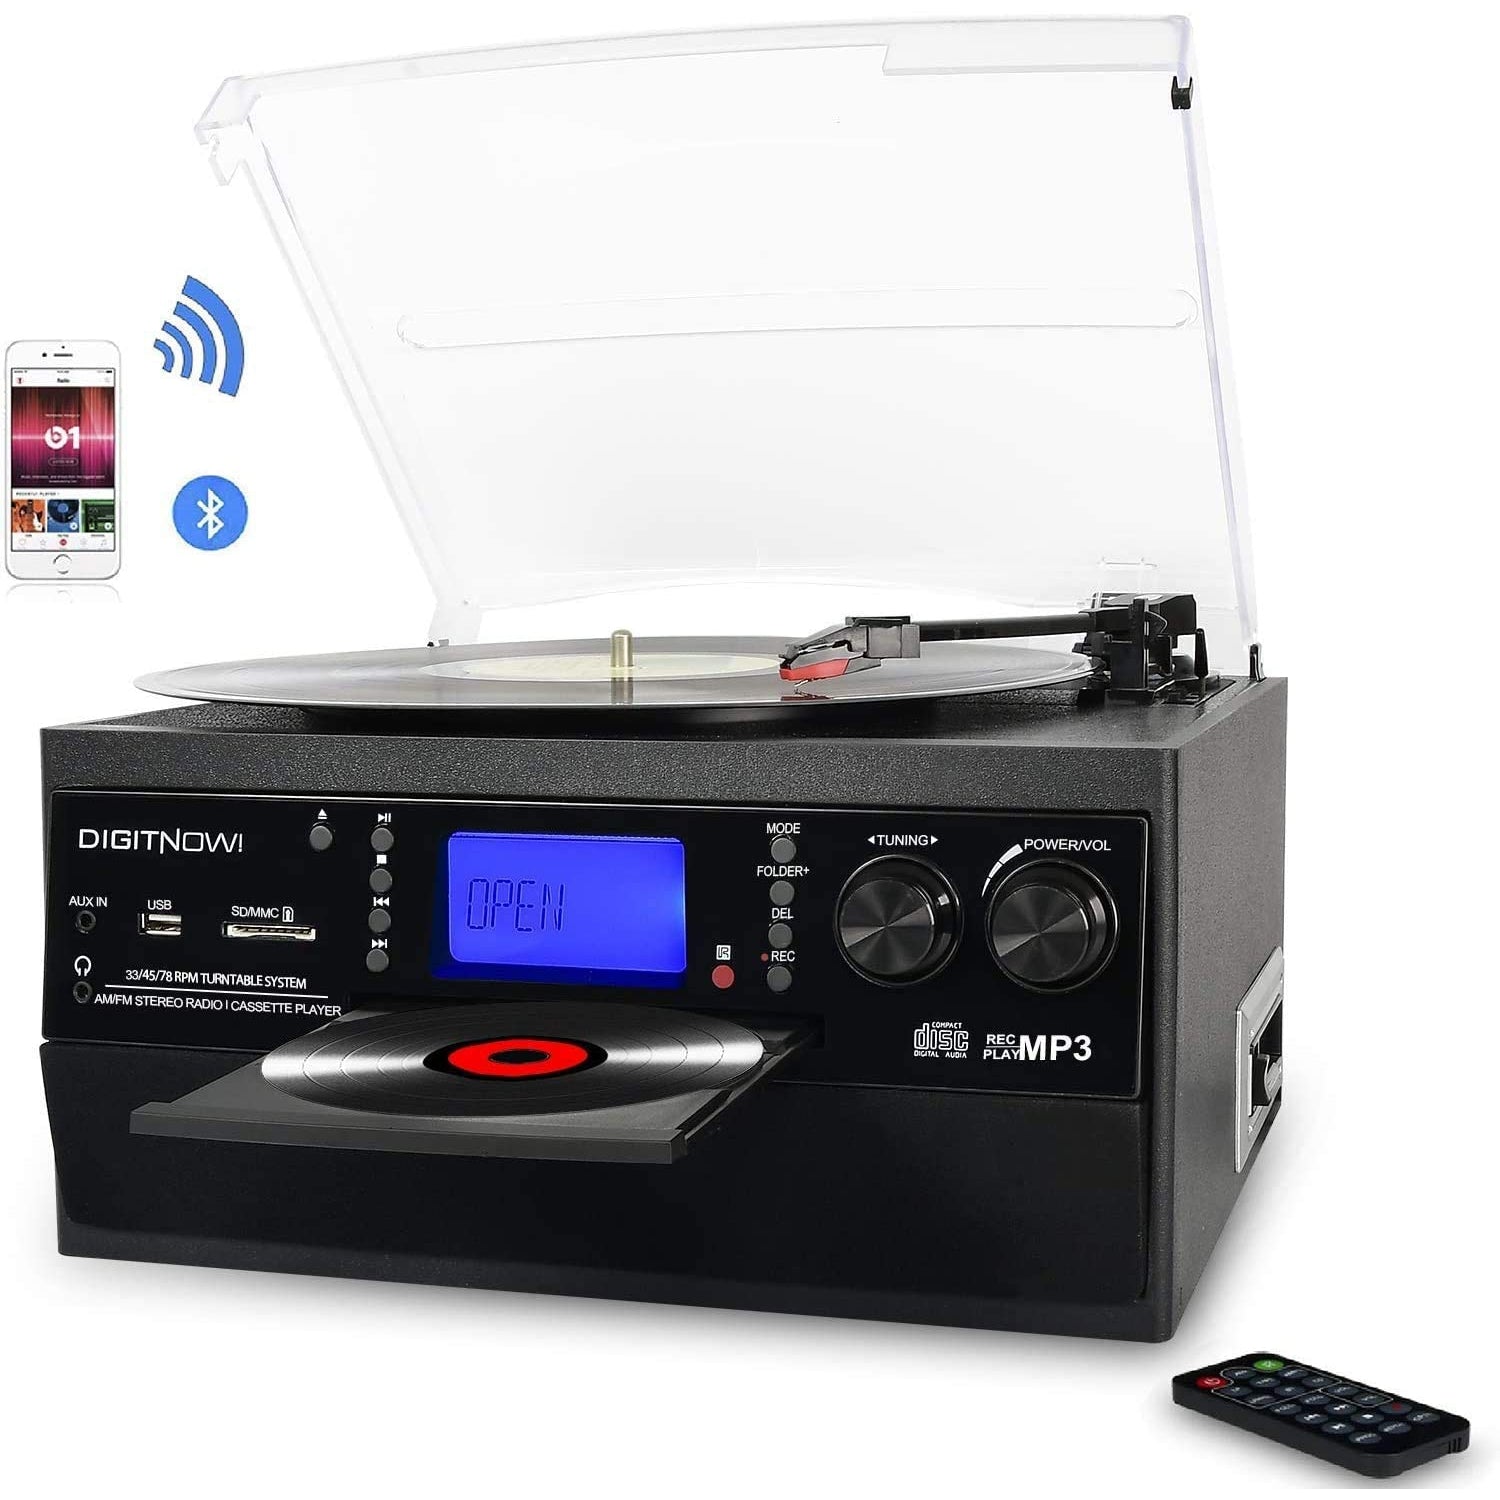 DIGITNOW! Bluetooth Vinyl Record Player Turntable, CD, Cassette, AM/FM Radio and Aux in with USB Port & SD Encoding - Black